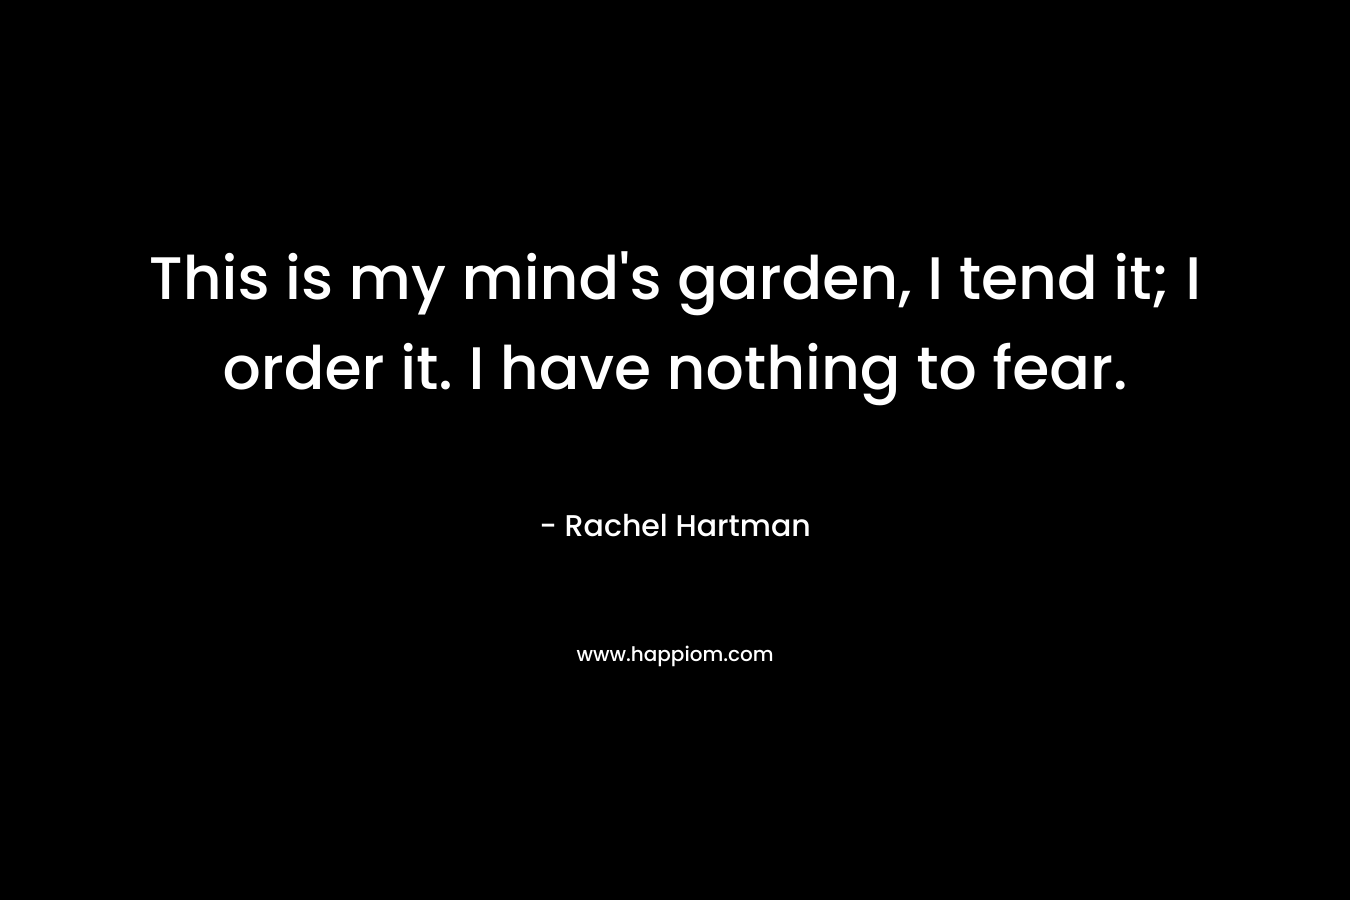 This is my mind’s garden, I tend it; I order it. I have nothing to fear. – Rachel Hartman